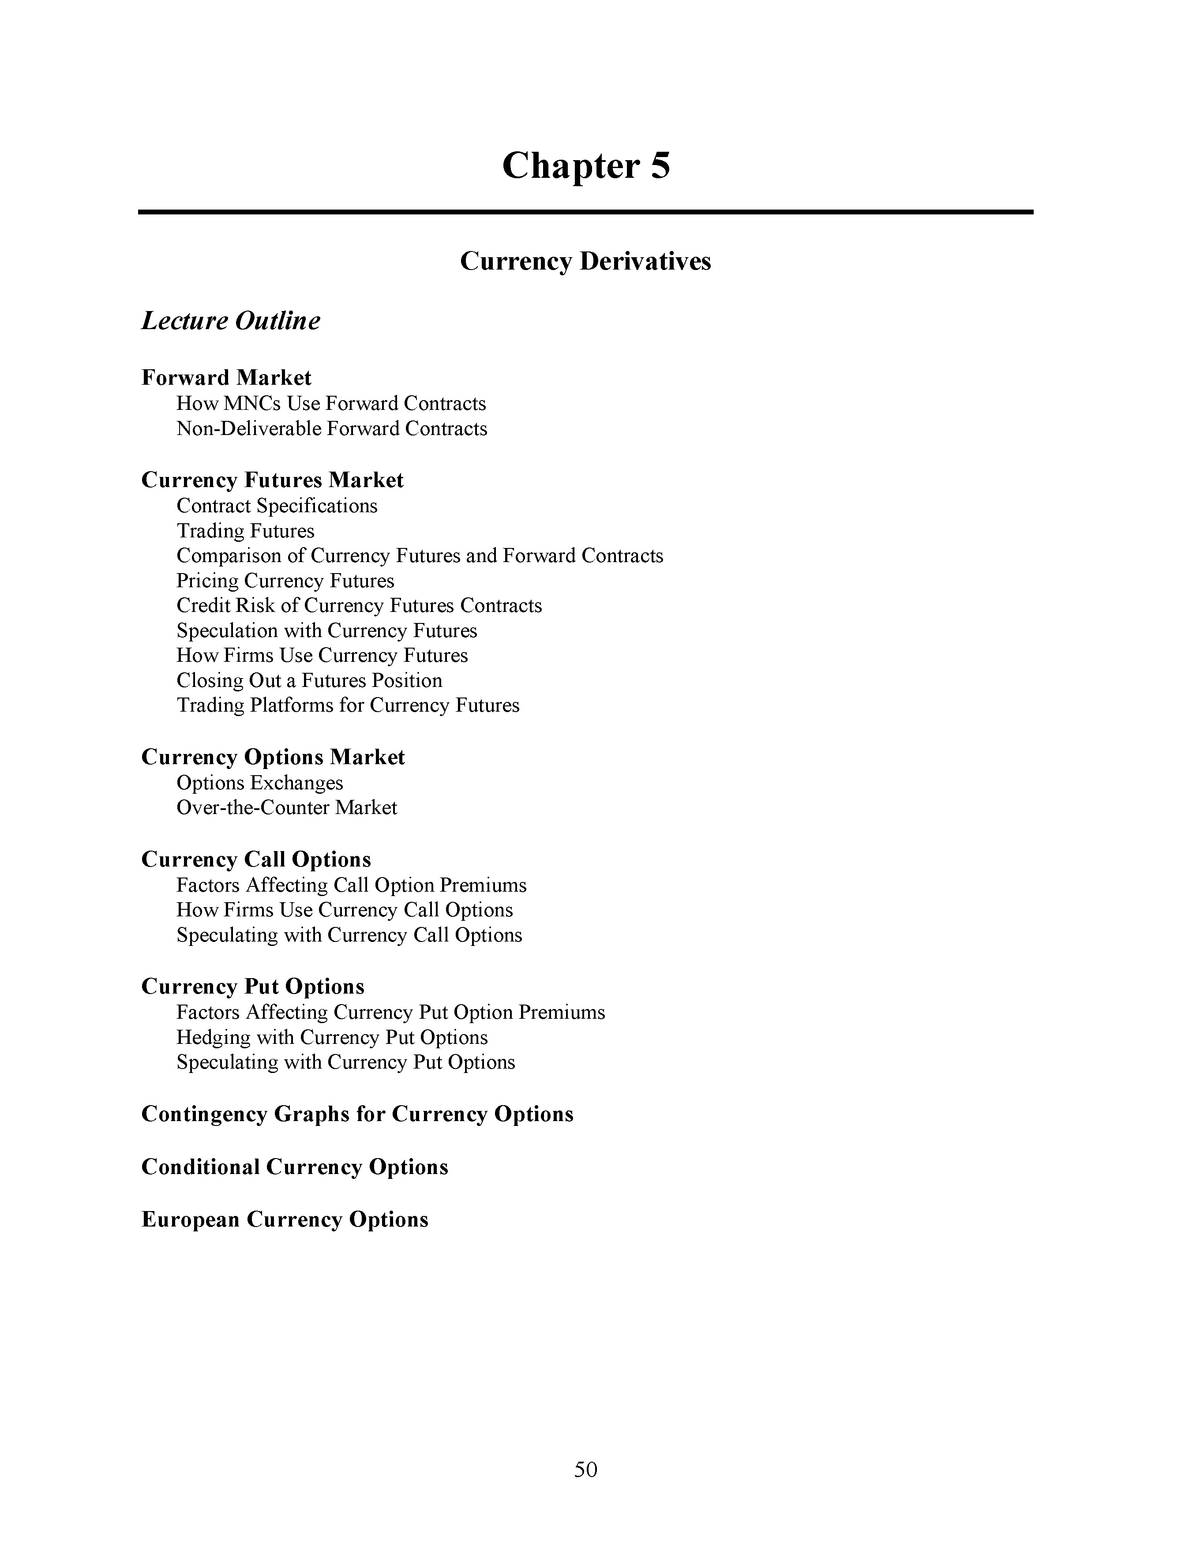 Chapter 5 Currency Derivatives 121070 International Corporate - 